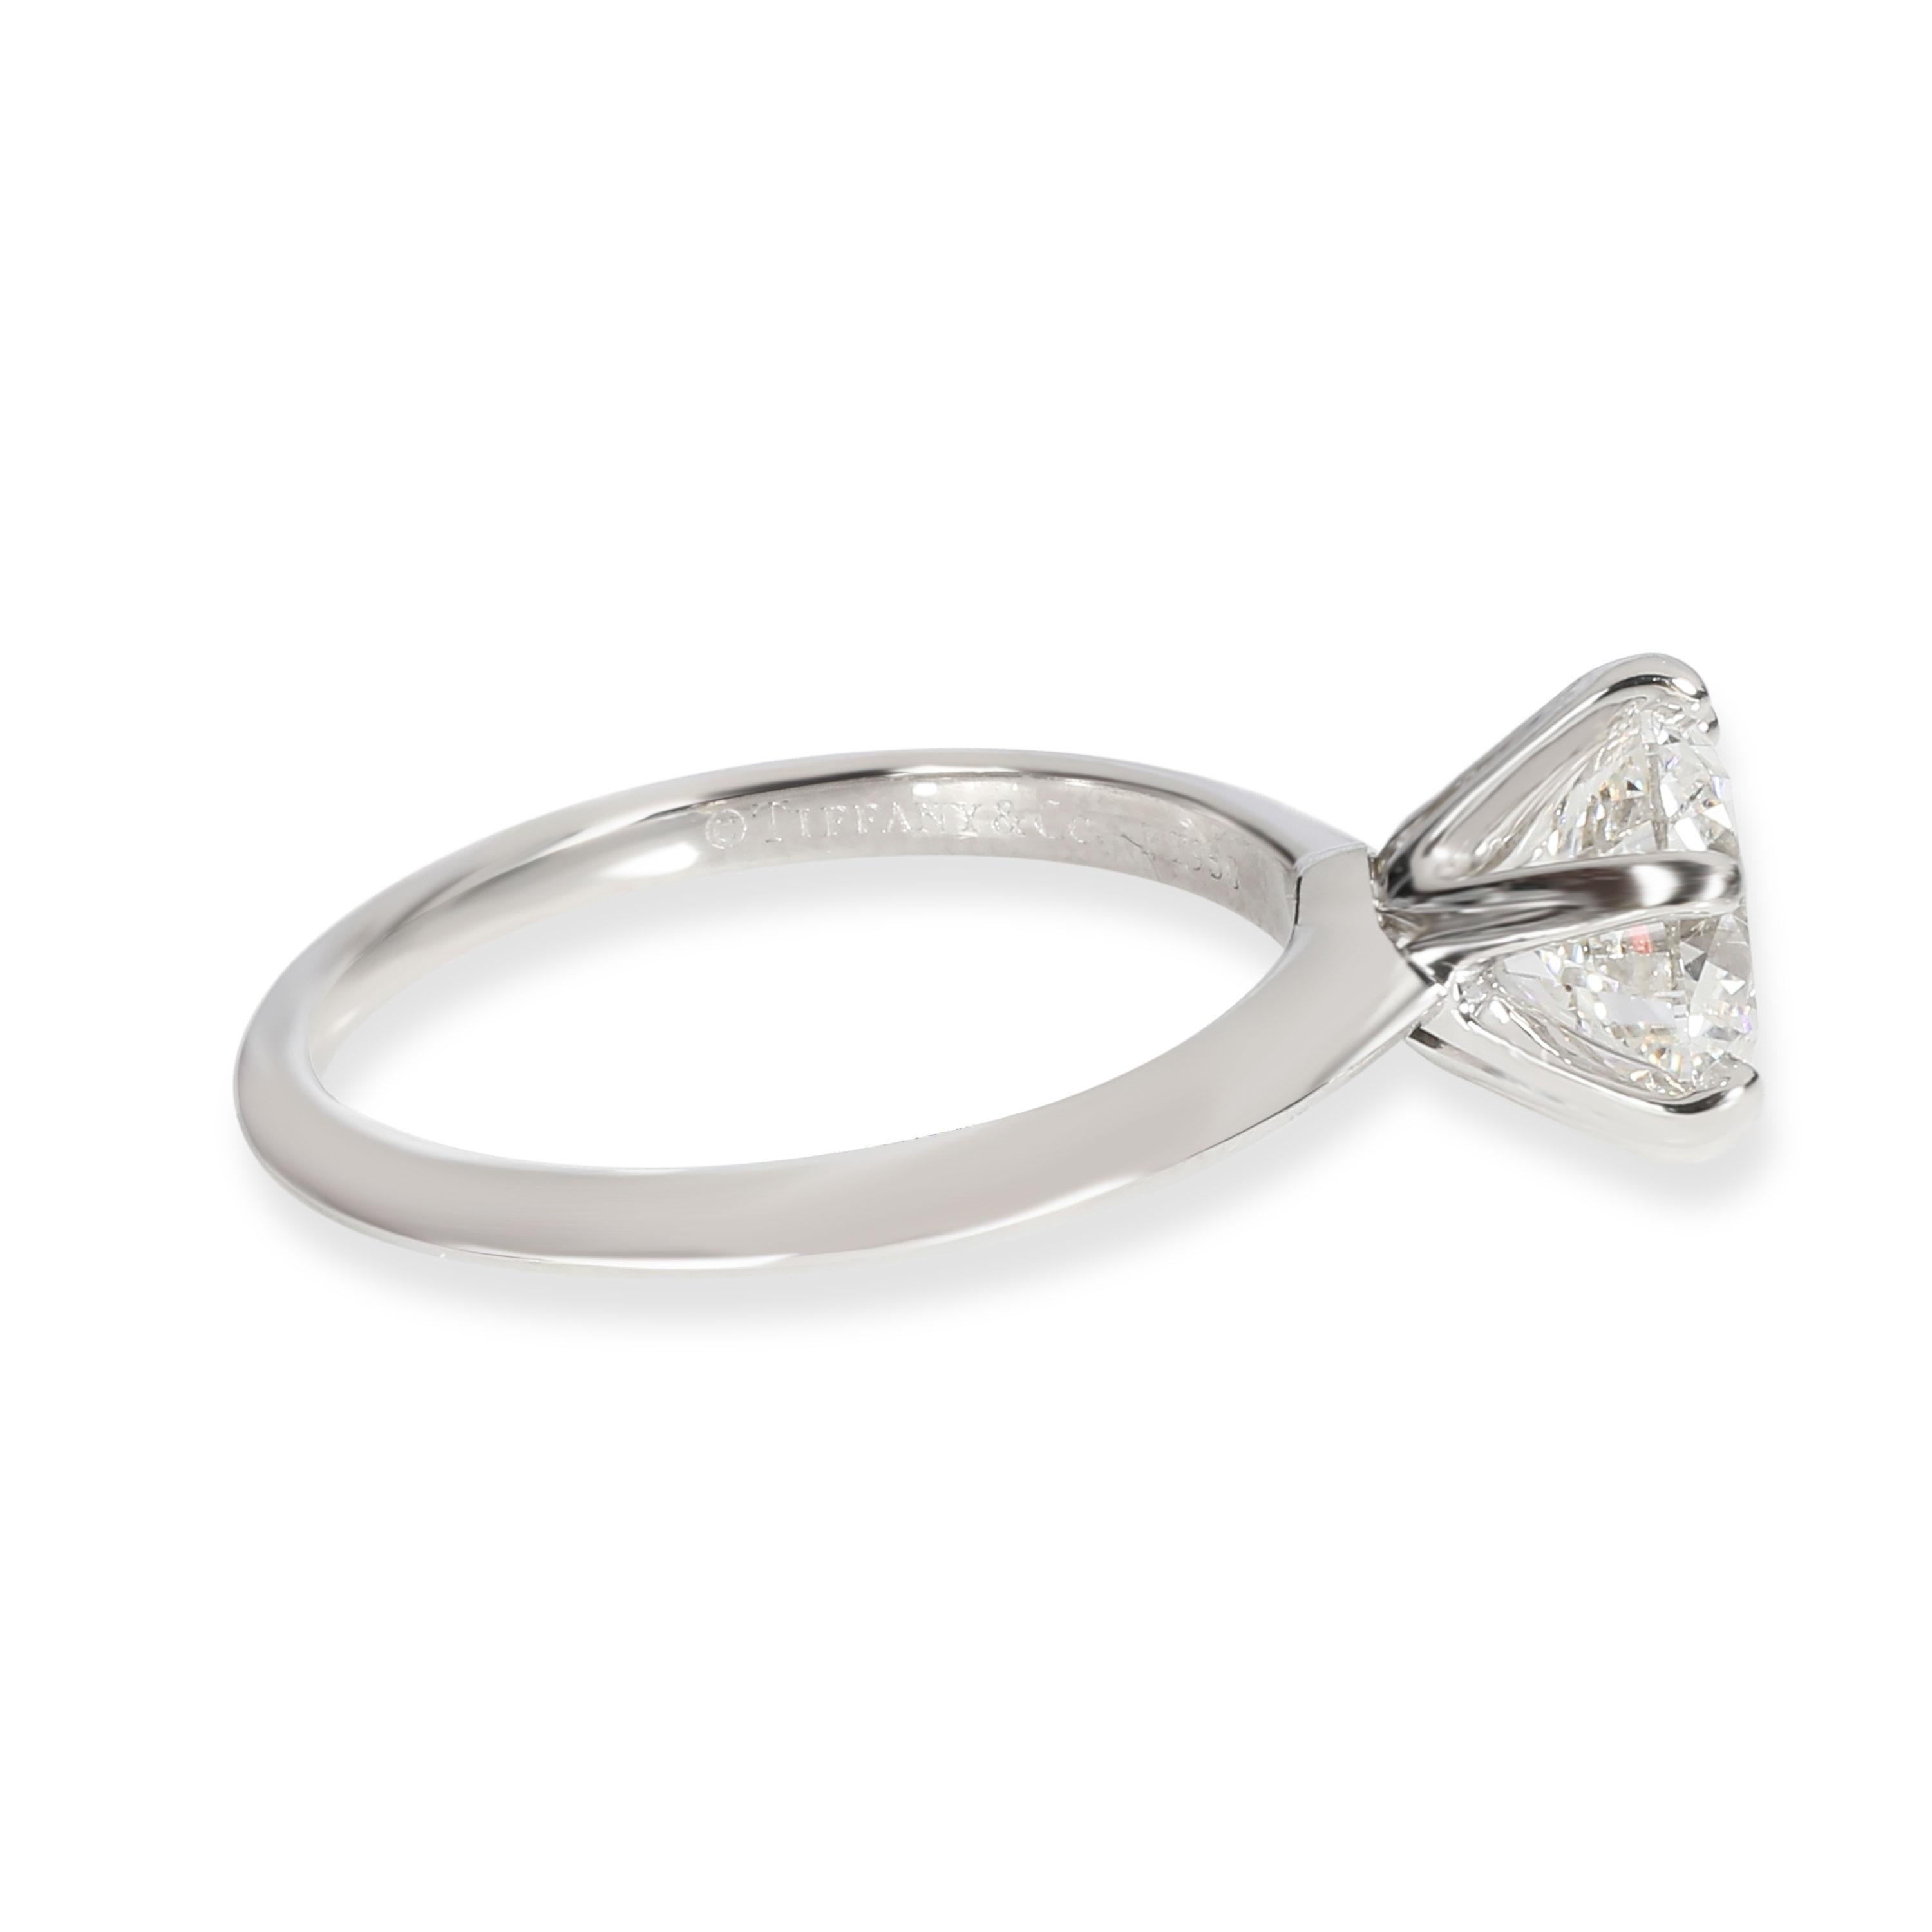 
Tiffany & Co. Diamond Solitaire Ring in Platinum I SI1 2.61 CTW

PRIMARY DETAILS
SKU: 107838
Listing Title: Tiffany & Co. Diamond Solitaire Ring in Platinum I SI1 2.61 CTW
Condition Description: Retails for 54,000 USD. In excellent condition and